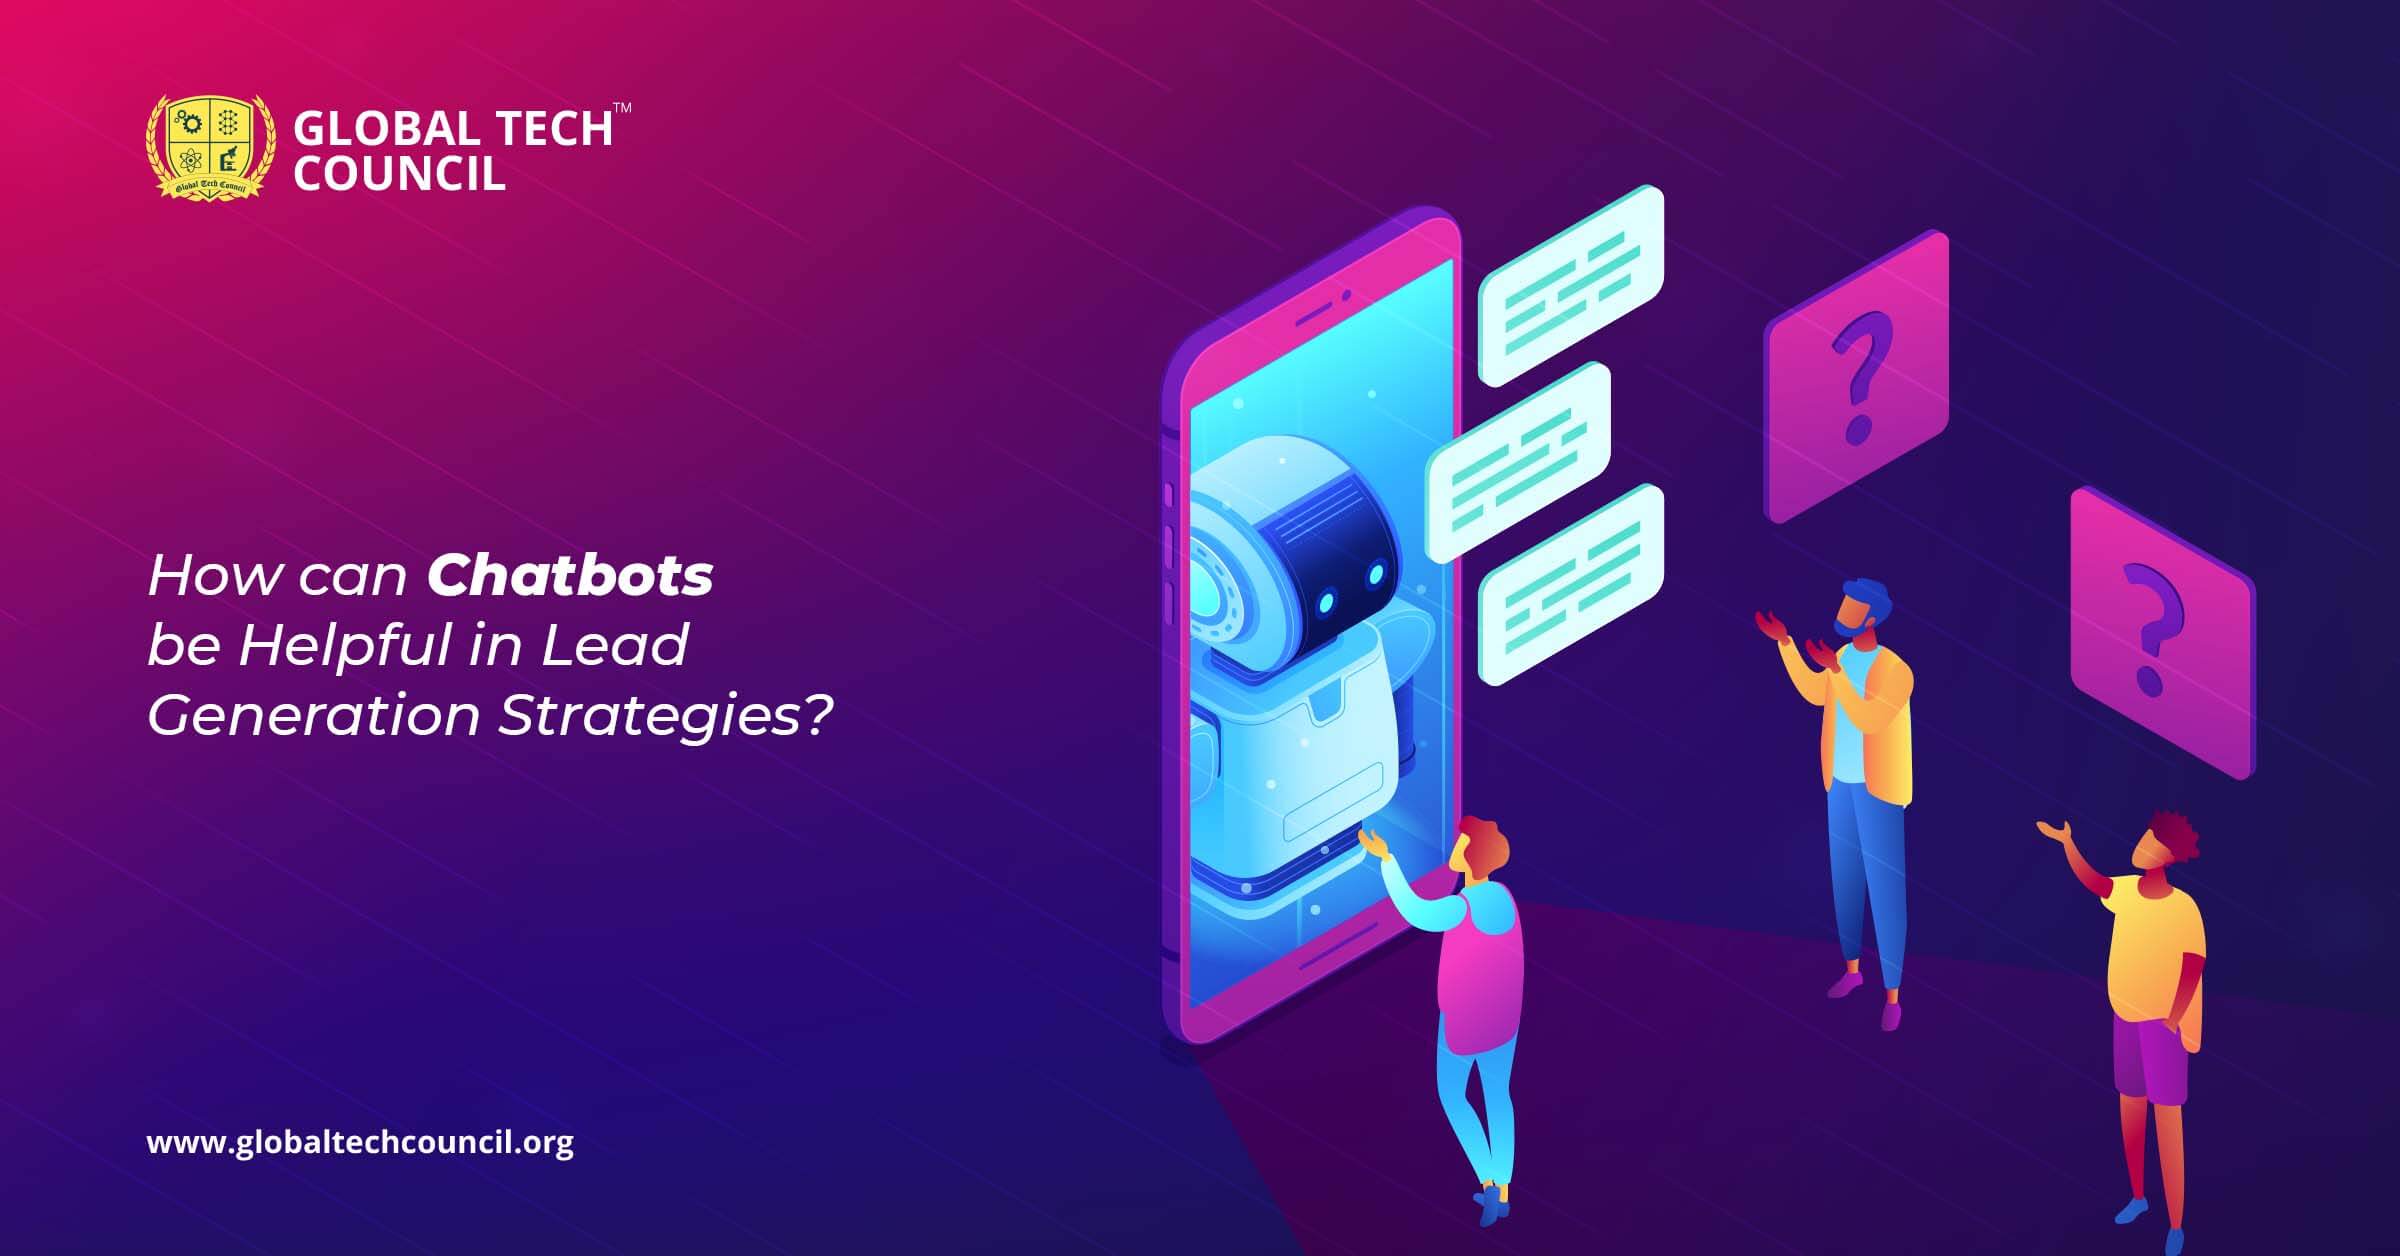 Chatbots be Helpful in Lead Generation Strategies